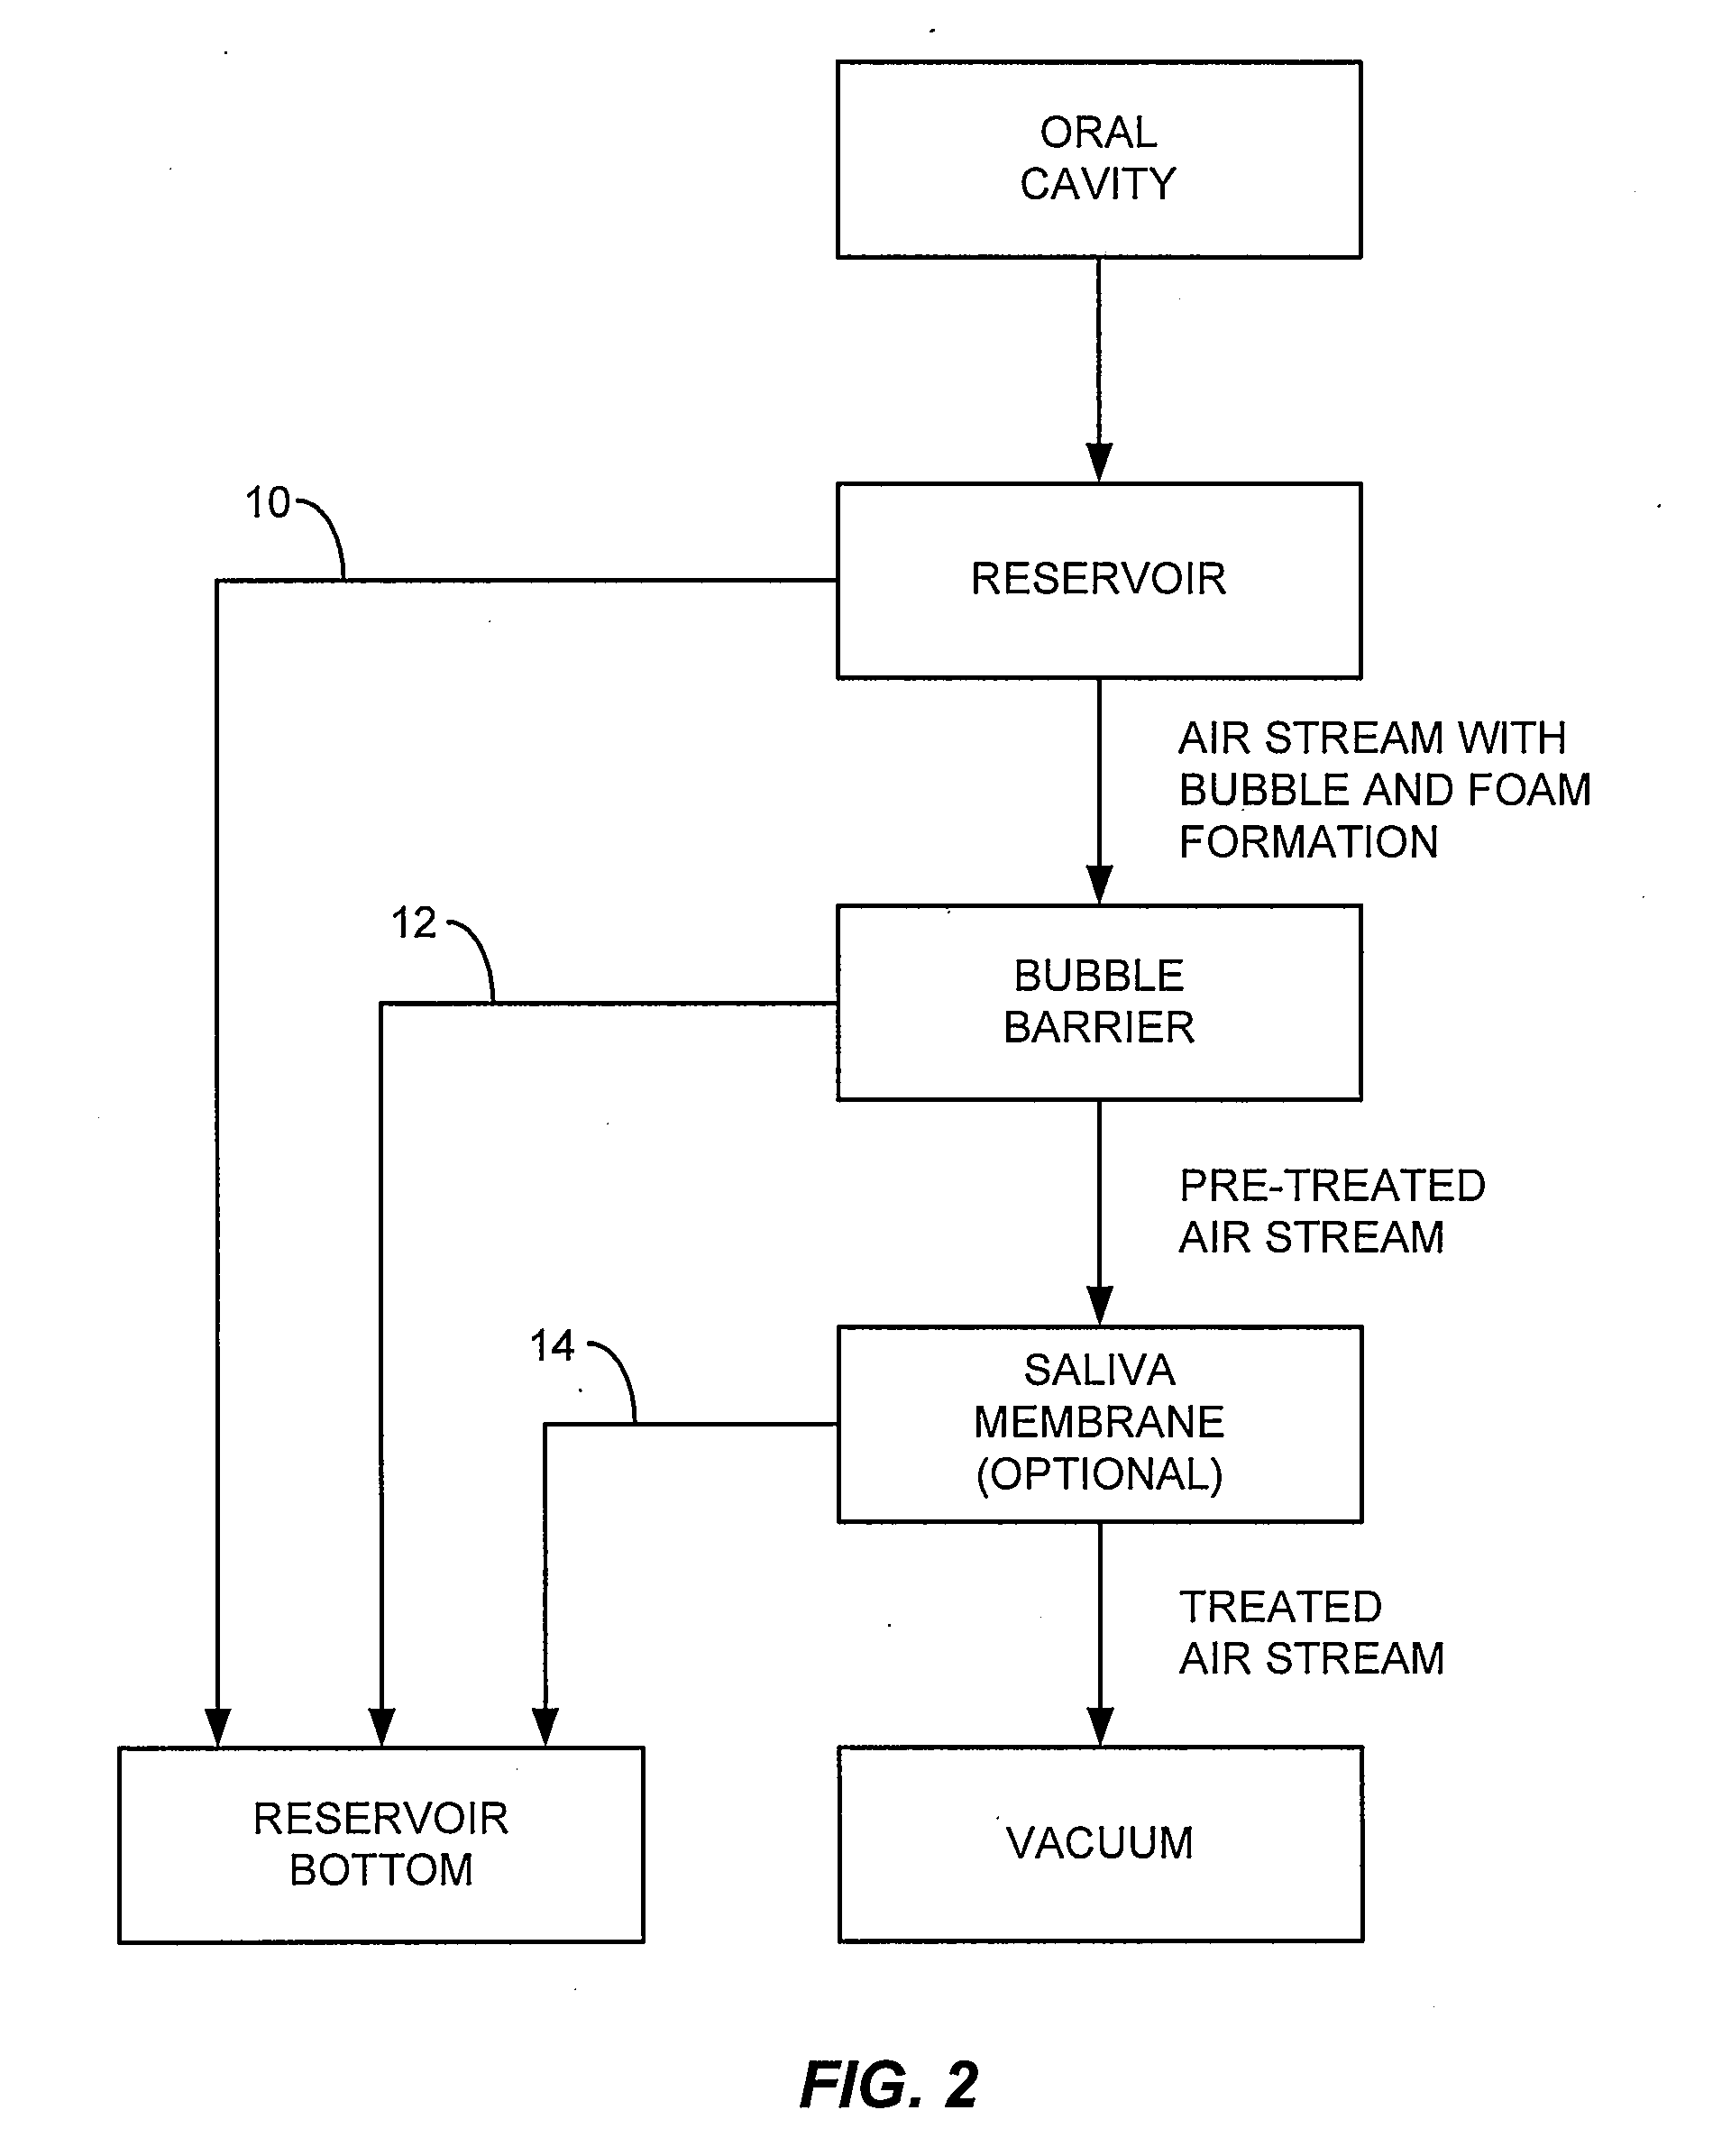 Apparatus and methods for reducing foaming during saliva collection